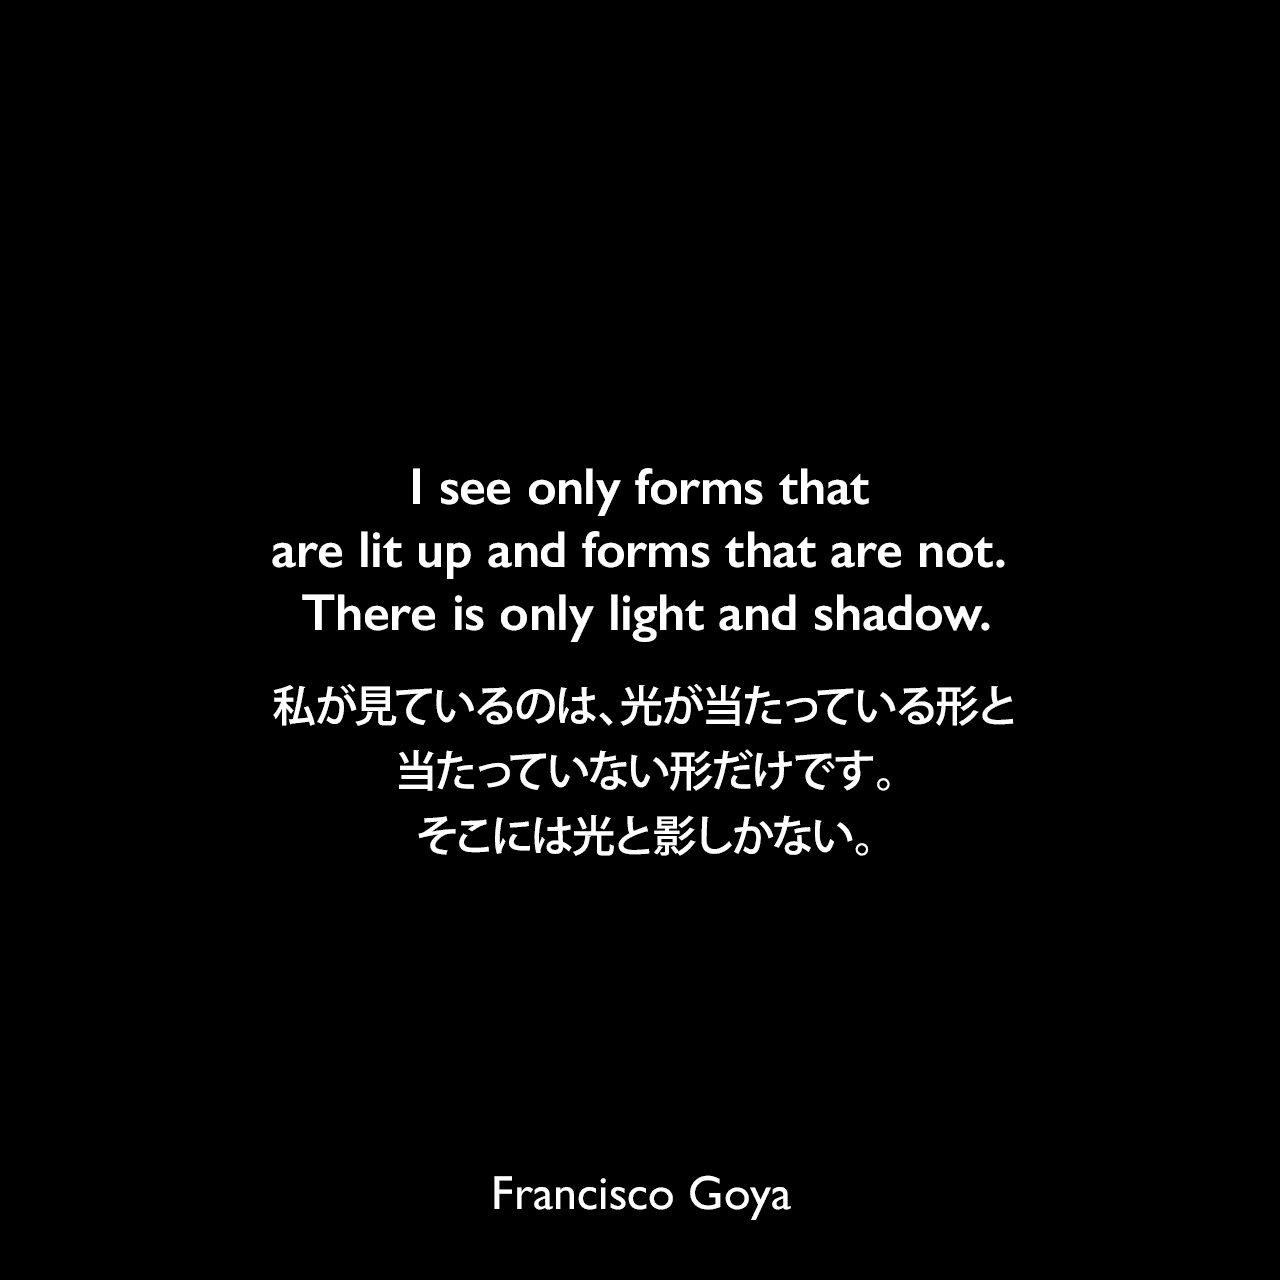 I see only forms that are lit up and forms that are not. There is only light and shadow.私が見ているのは、光が当たっている形と、当たっていない形だけです。そこには光と影しかない。Francisco Goya